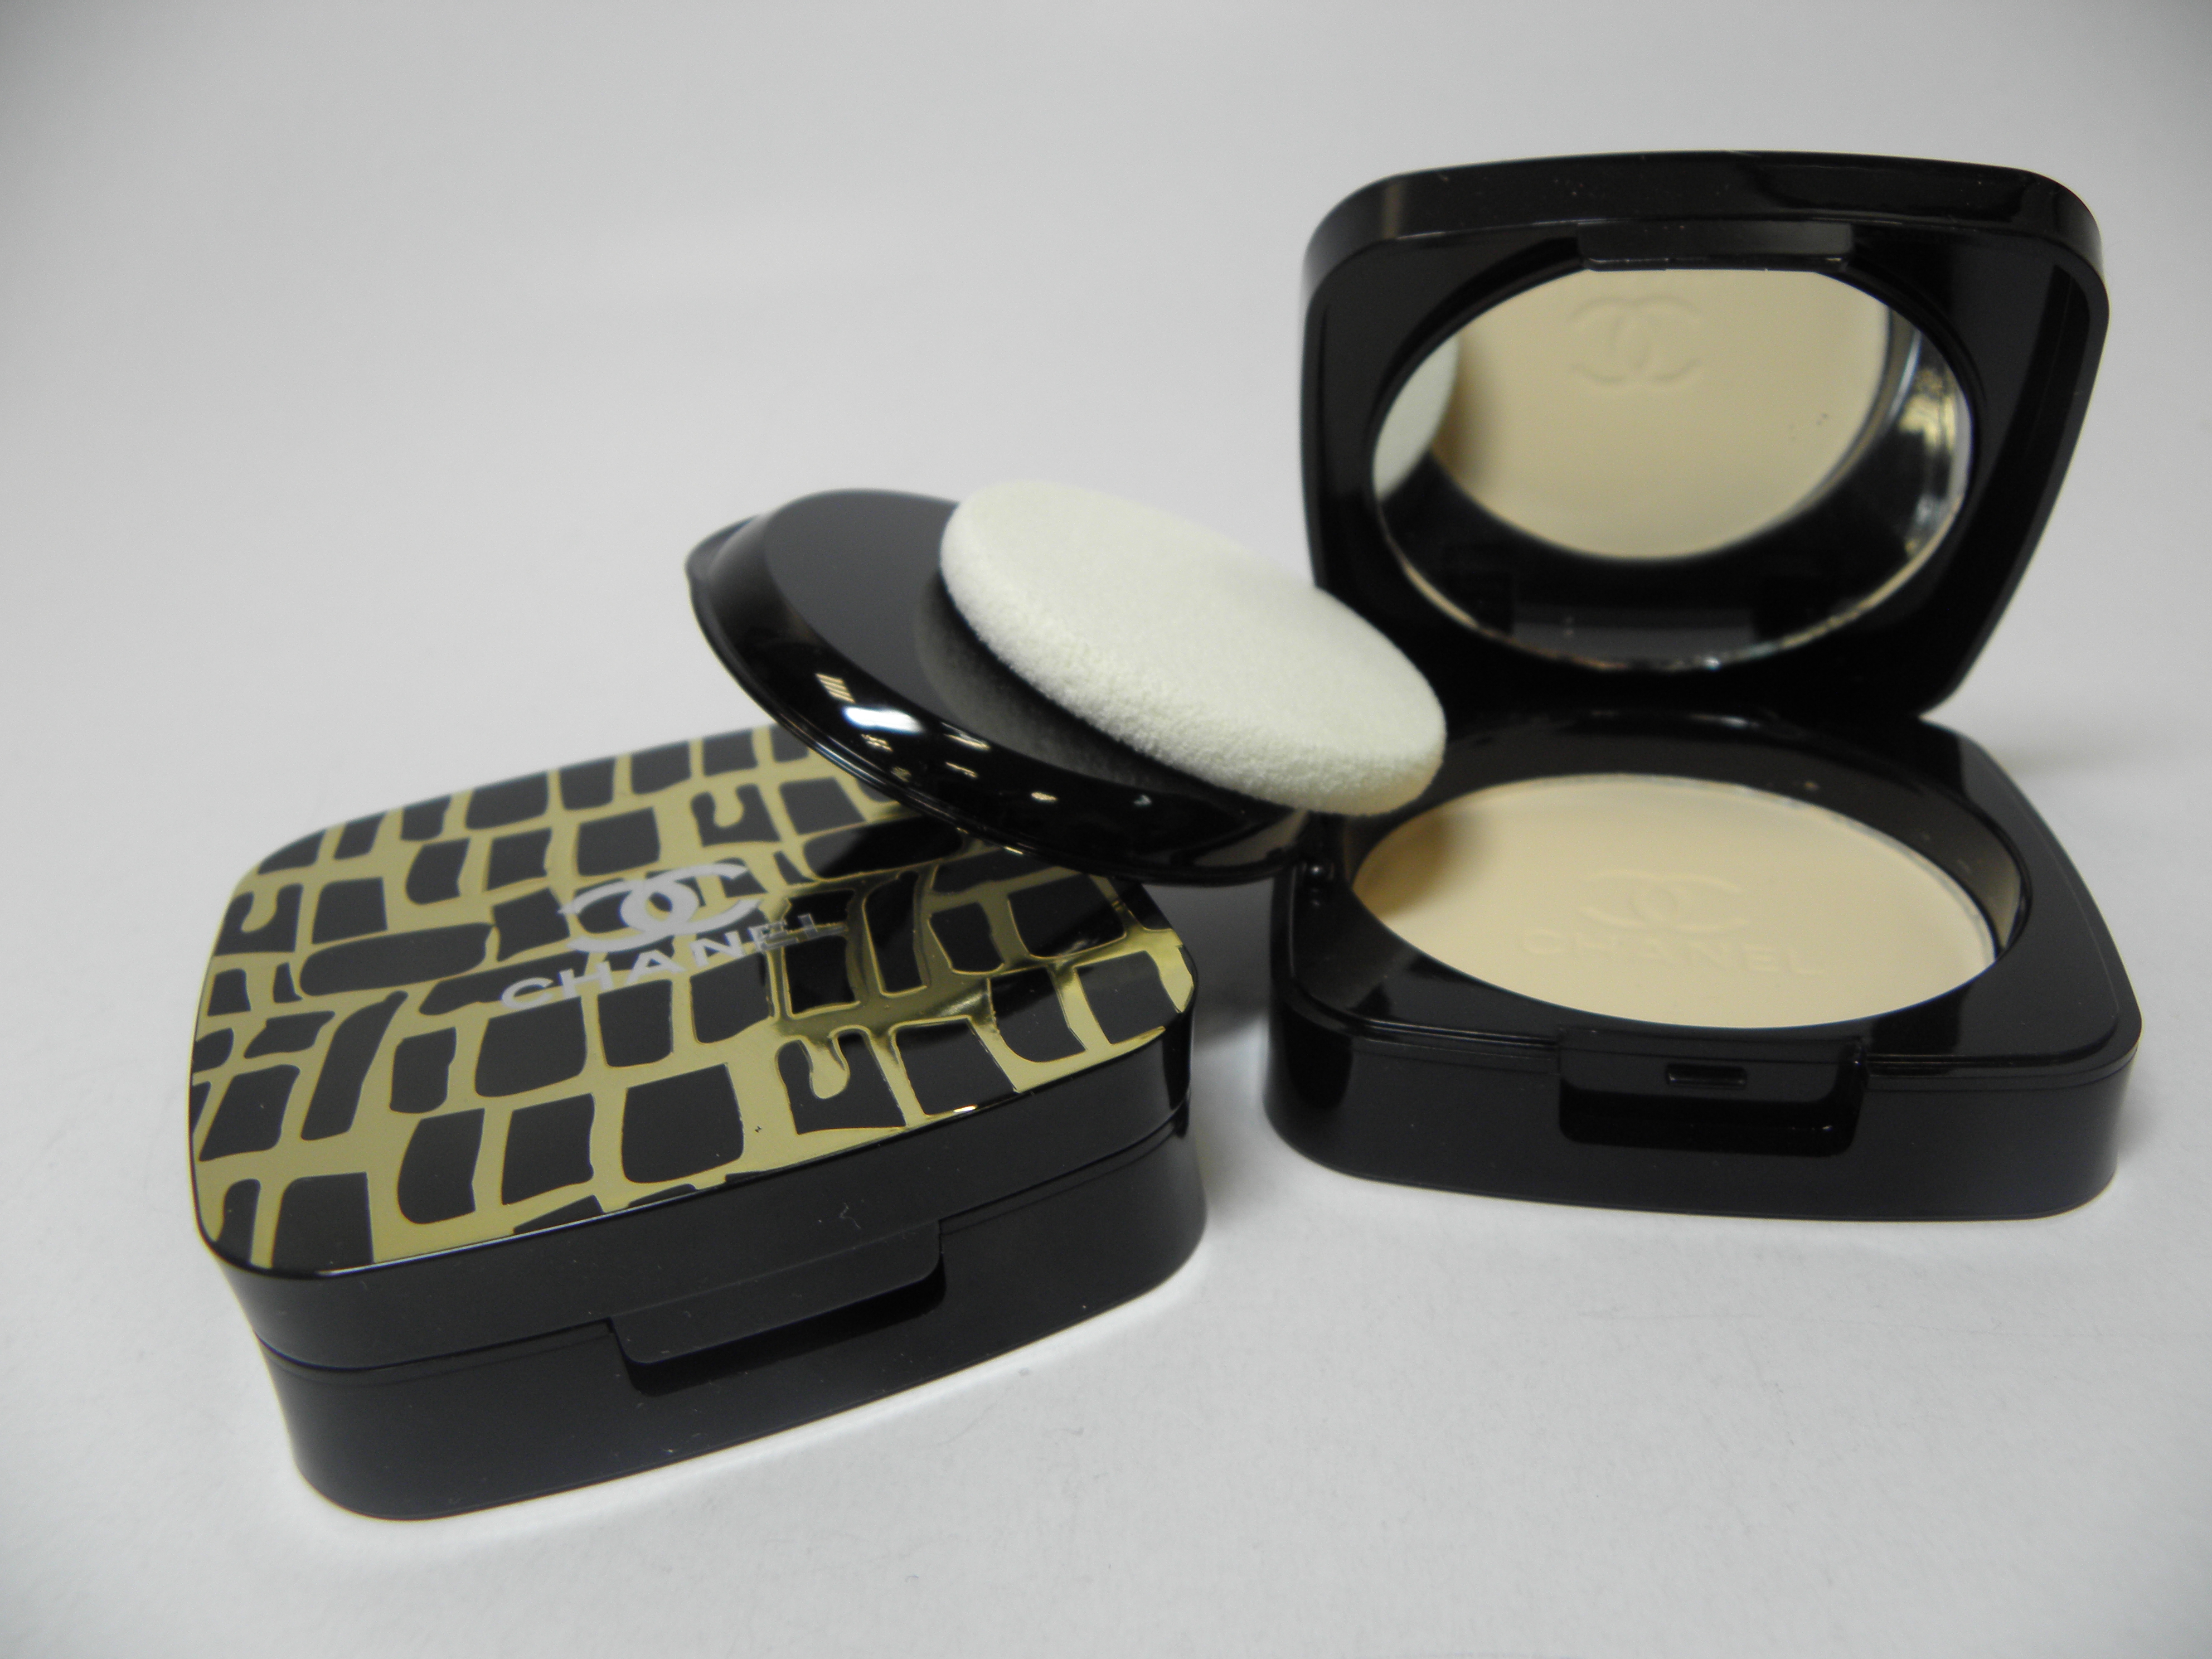 CHANEL,COMPACT POWDER WITH MIRROR